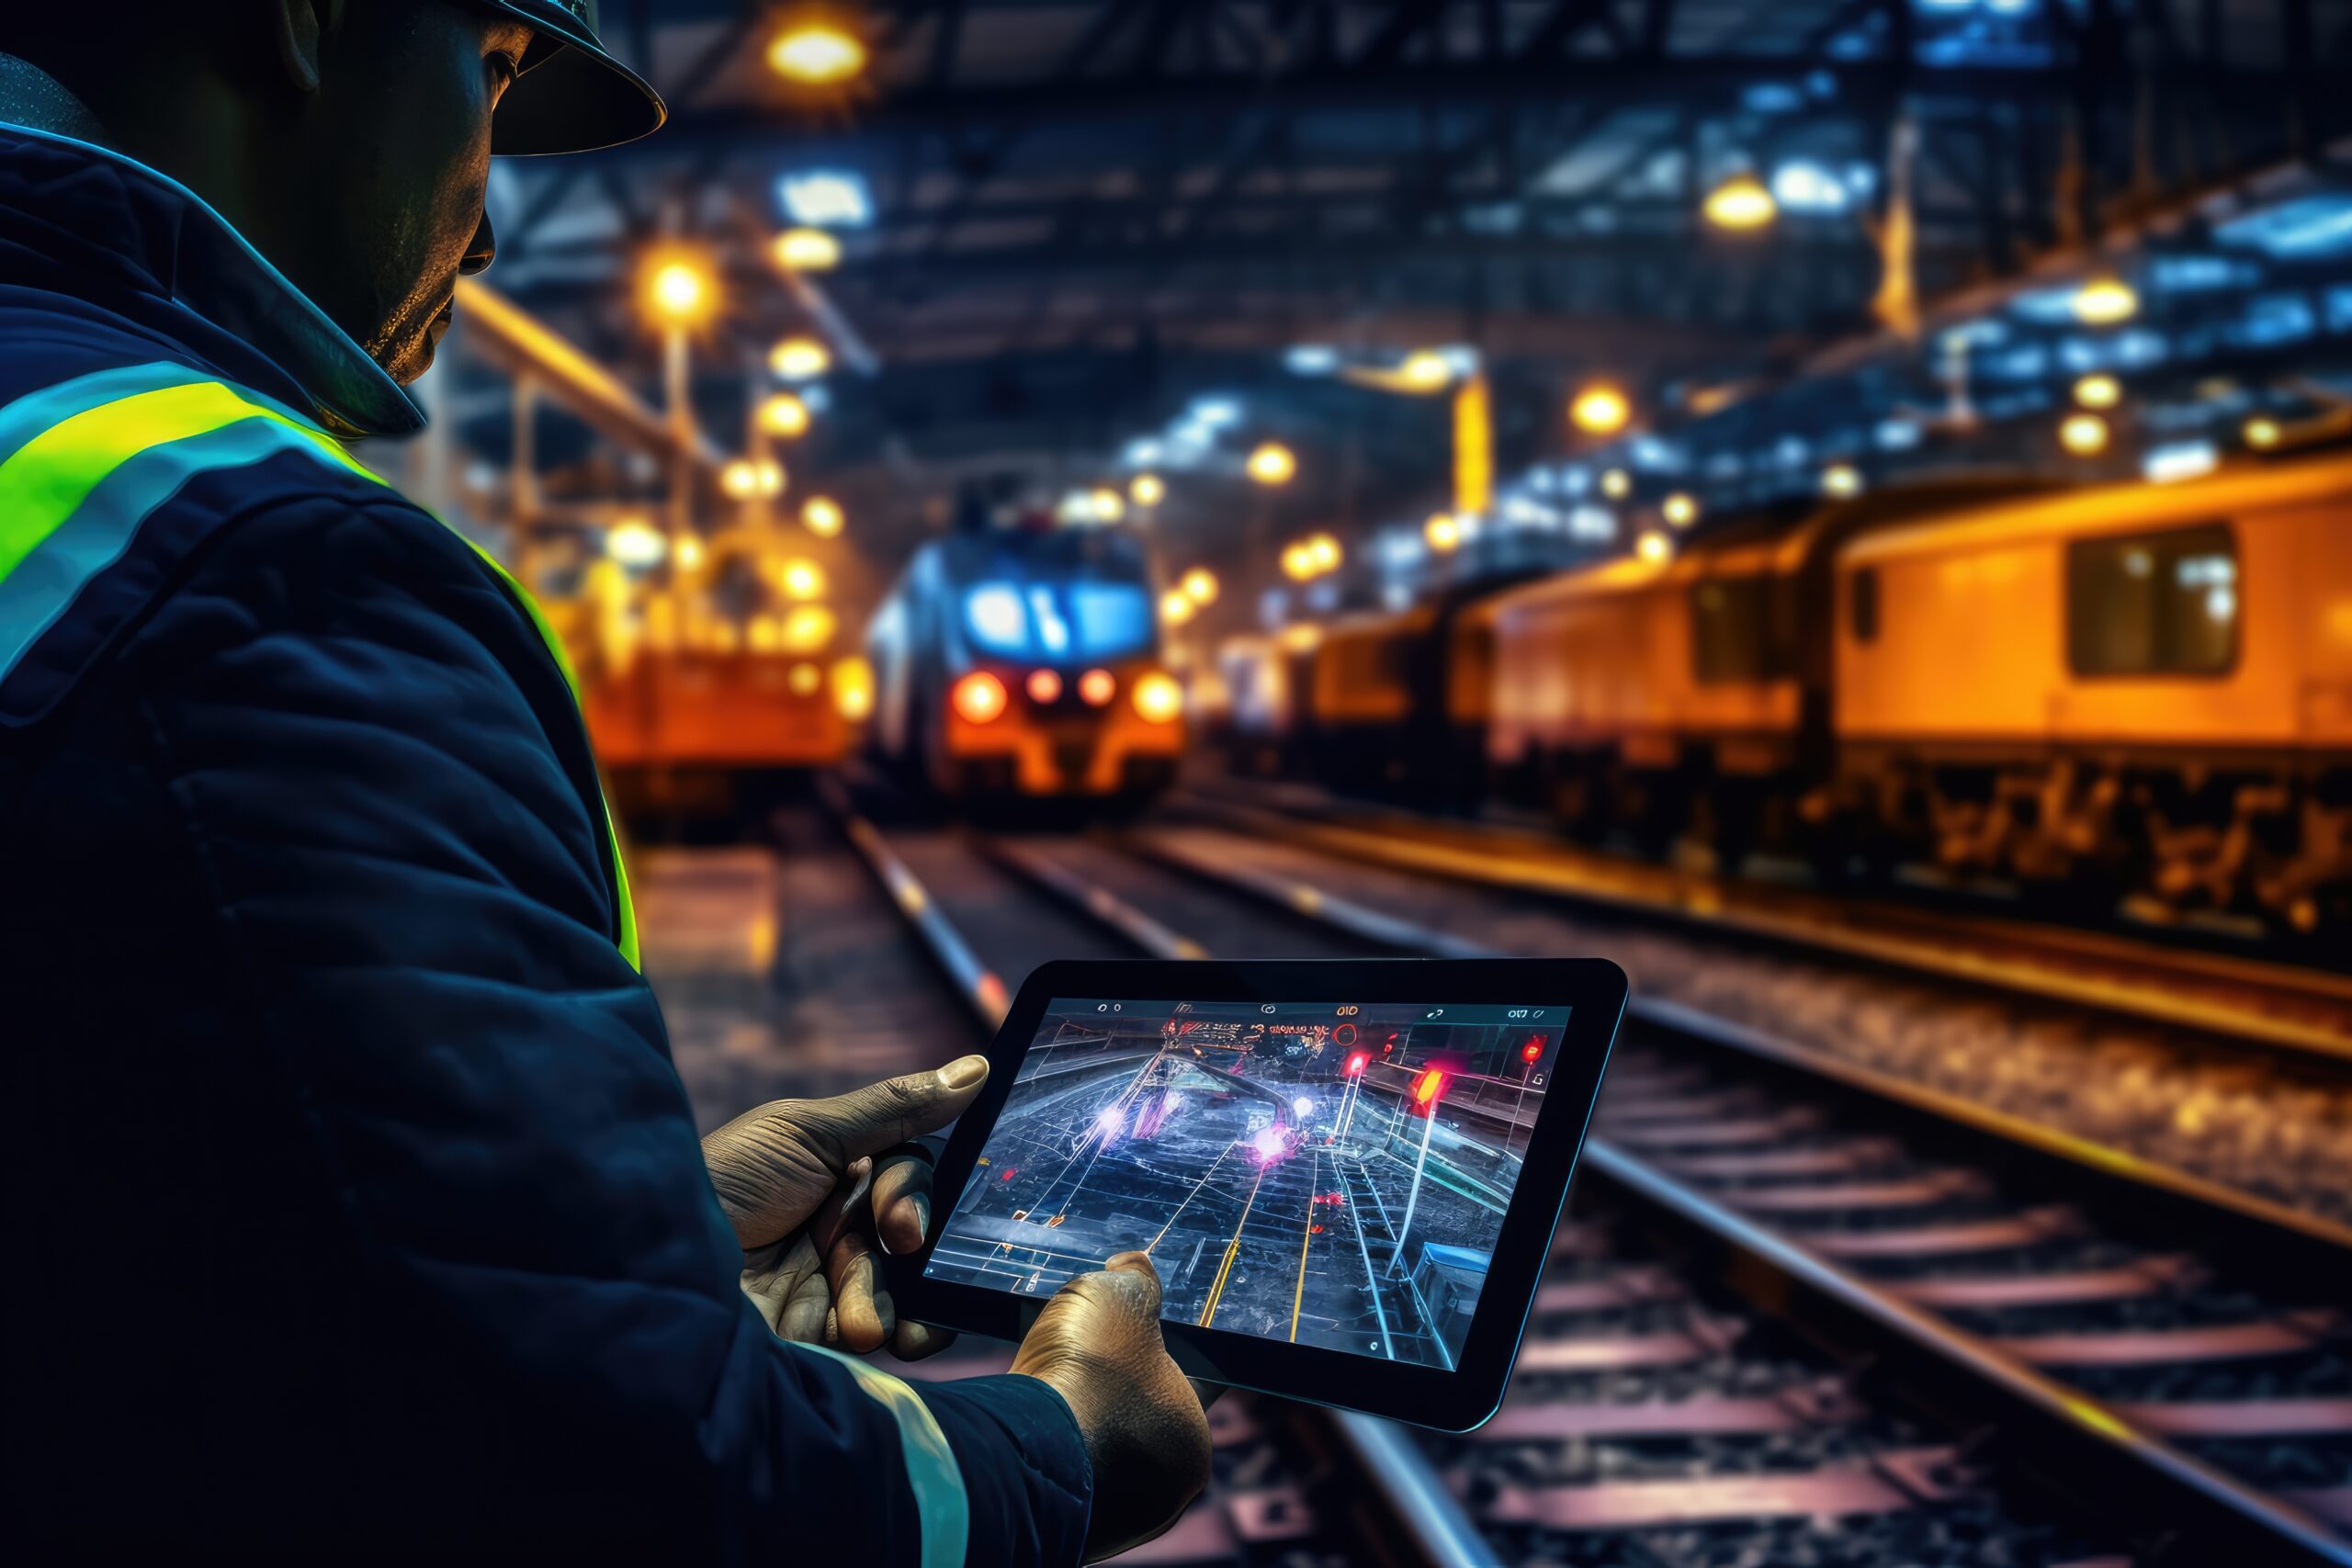 engineer looks at ipad as train comes down the tracks